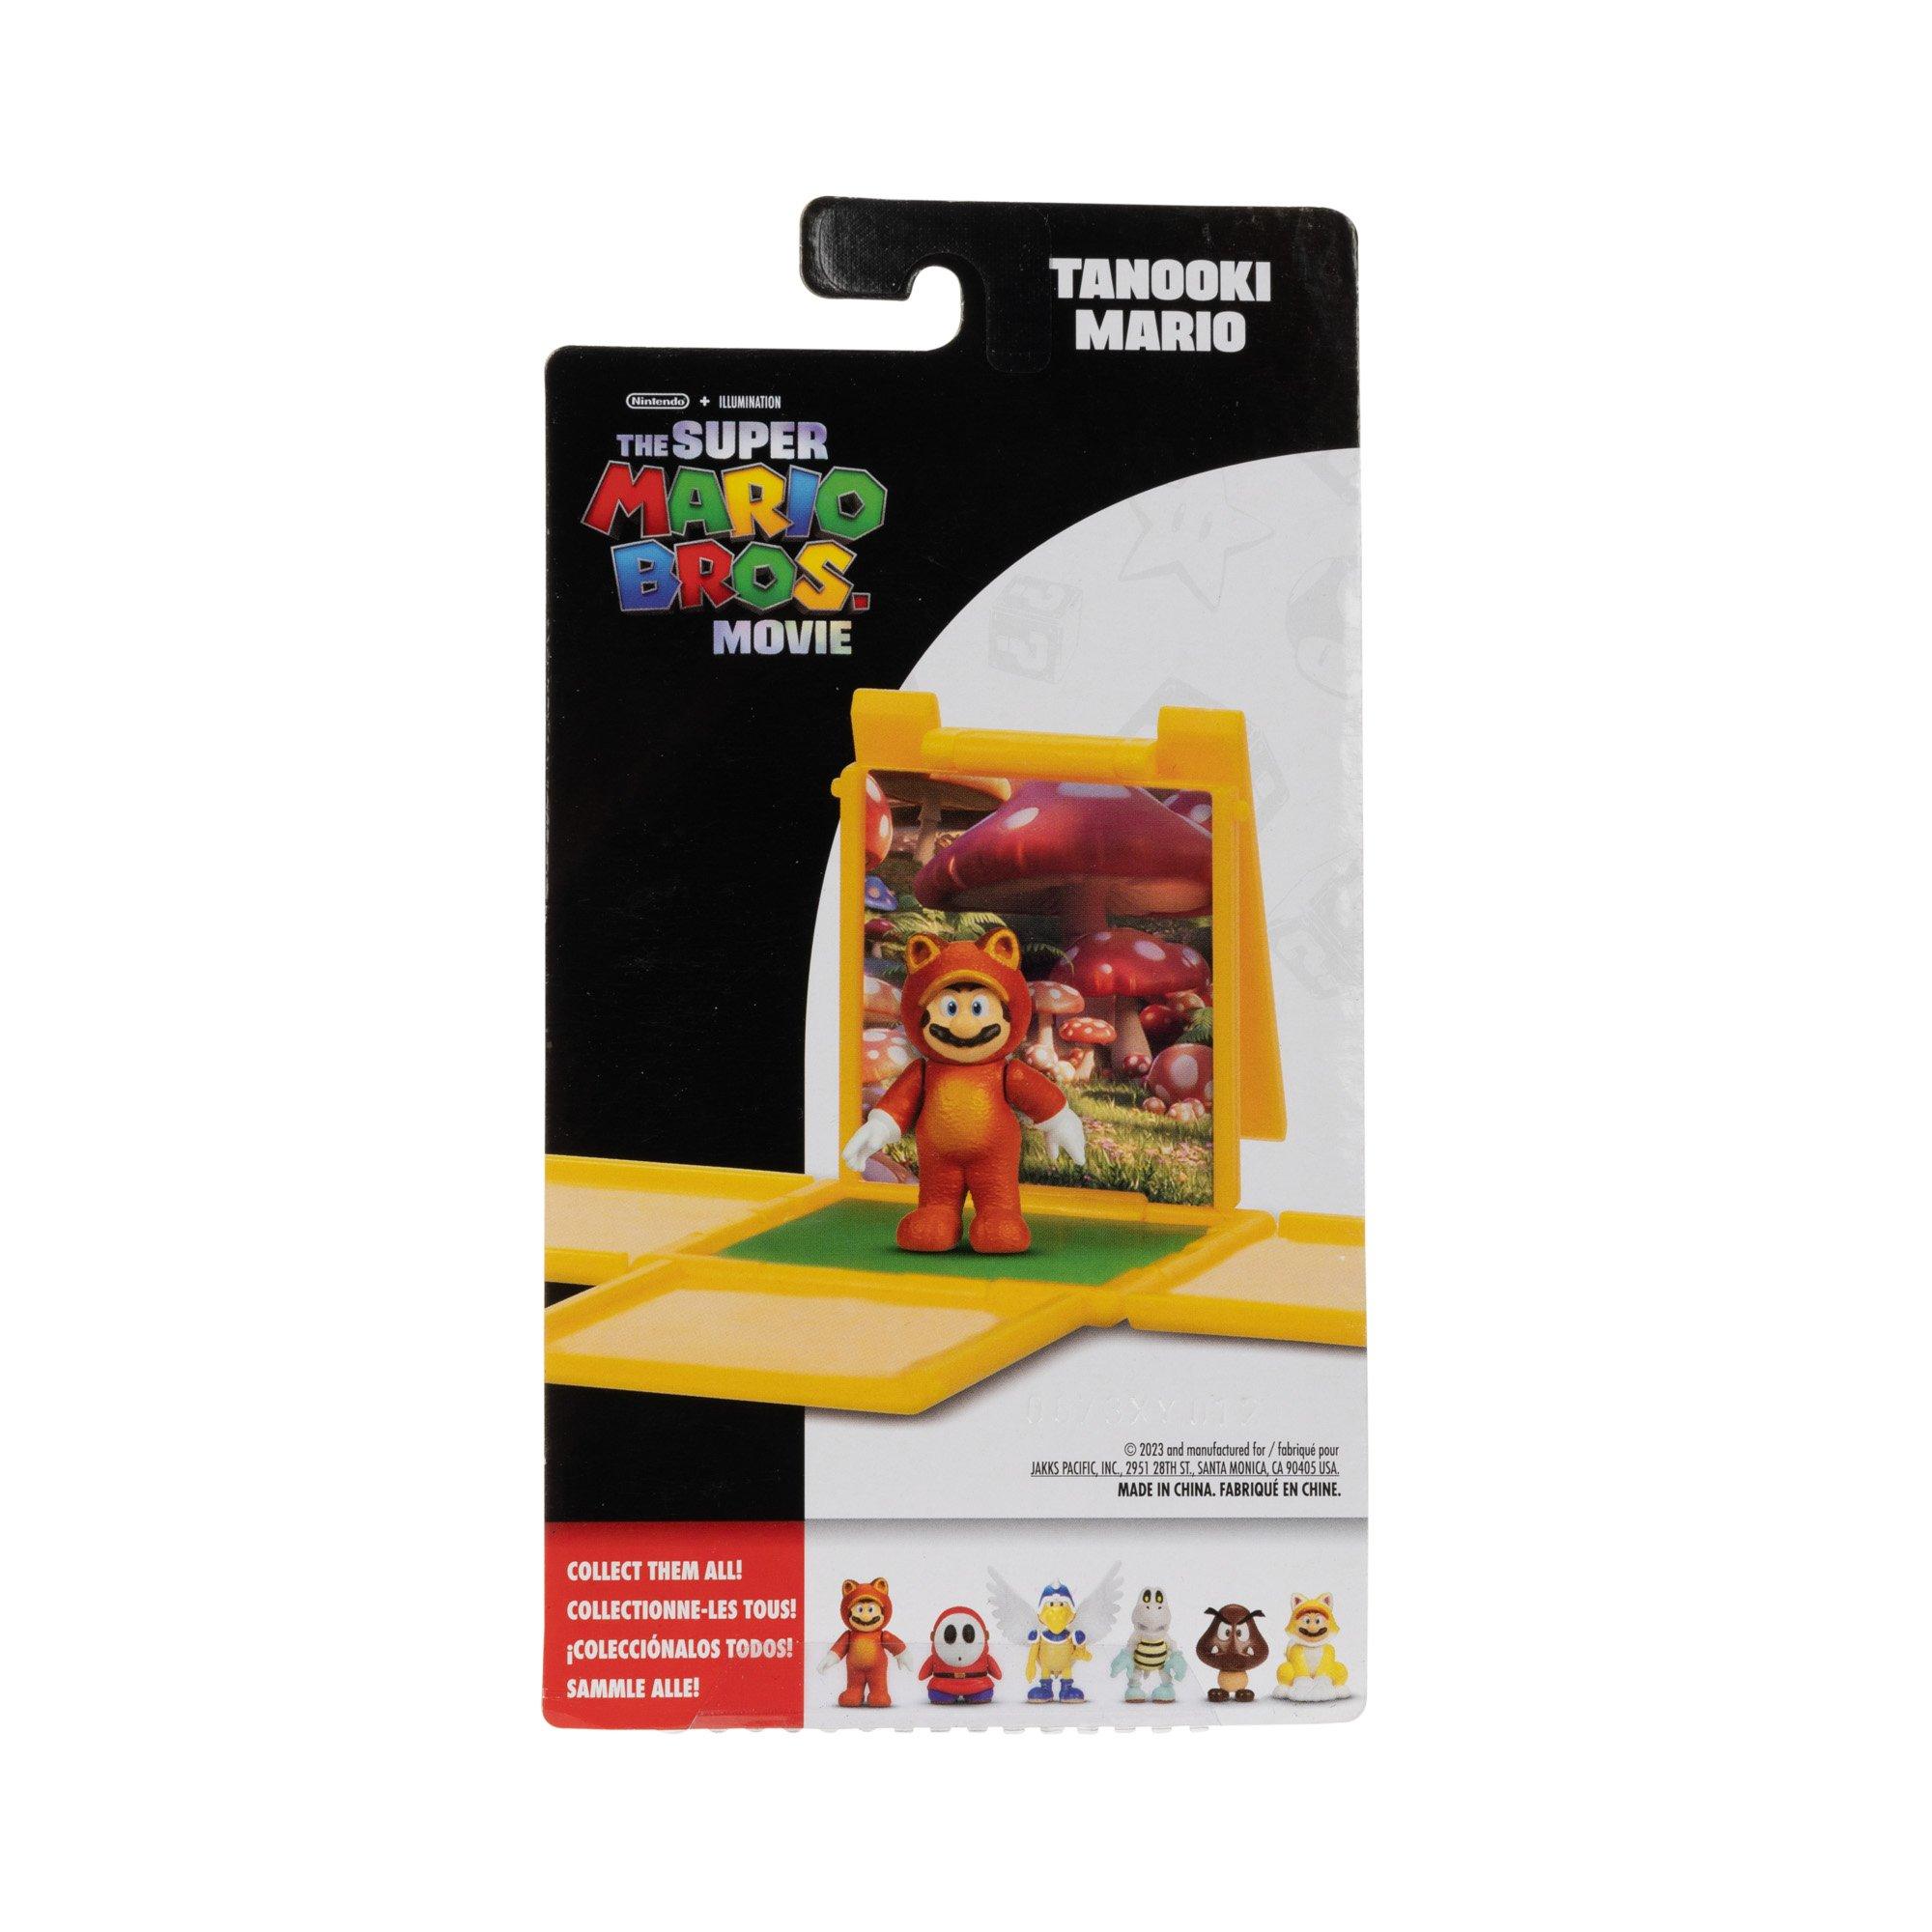  The Super Mario Bros. Movie - 5 Inch Action Figures Series 2 –  Tanooki Mario Figure with Leaf Accessory : Toys & Games